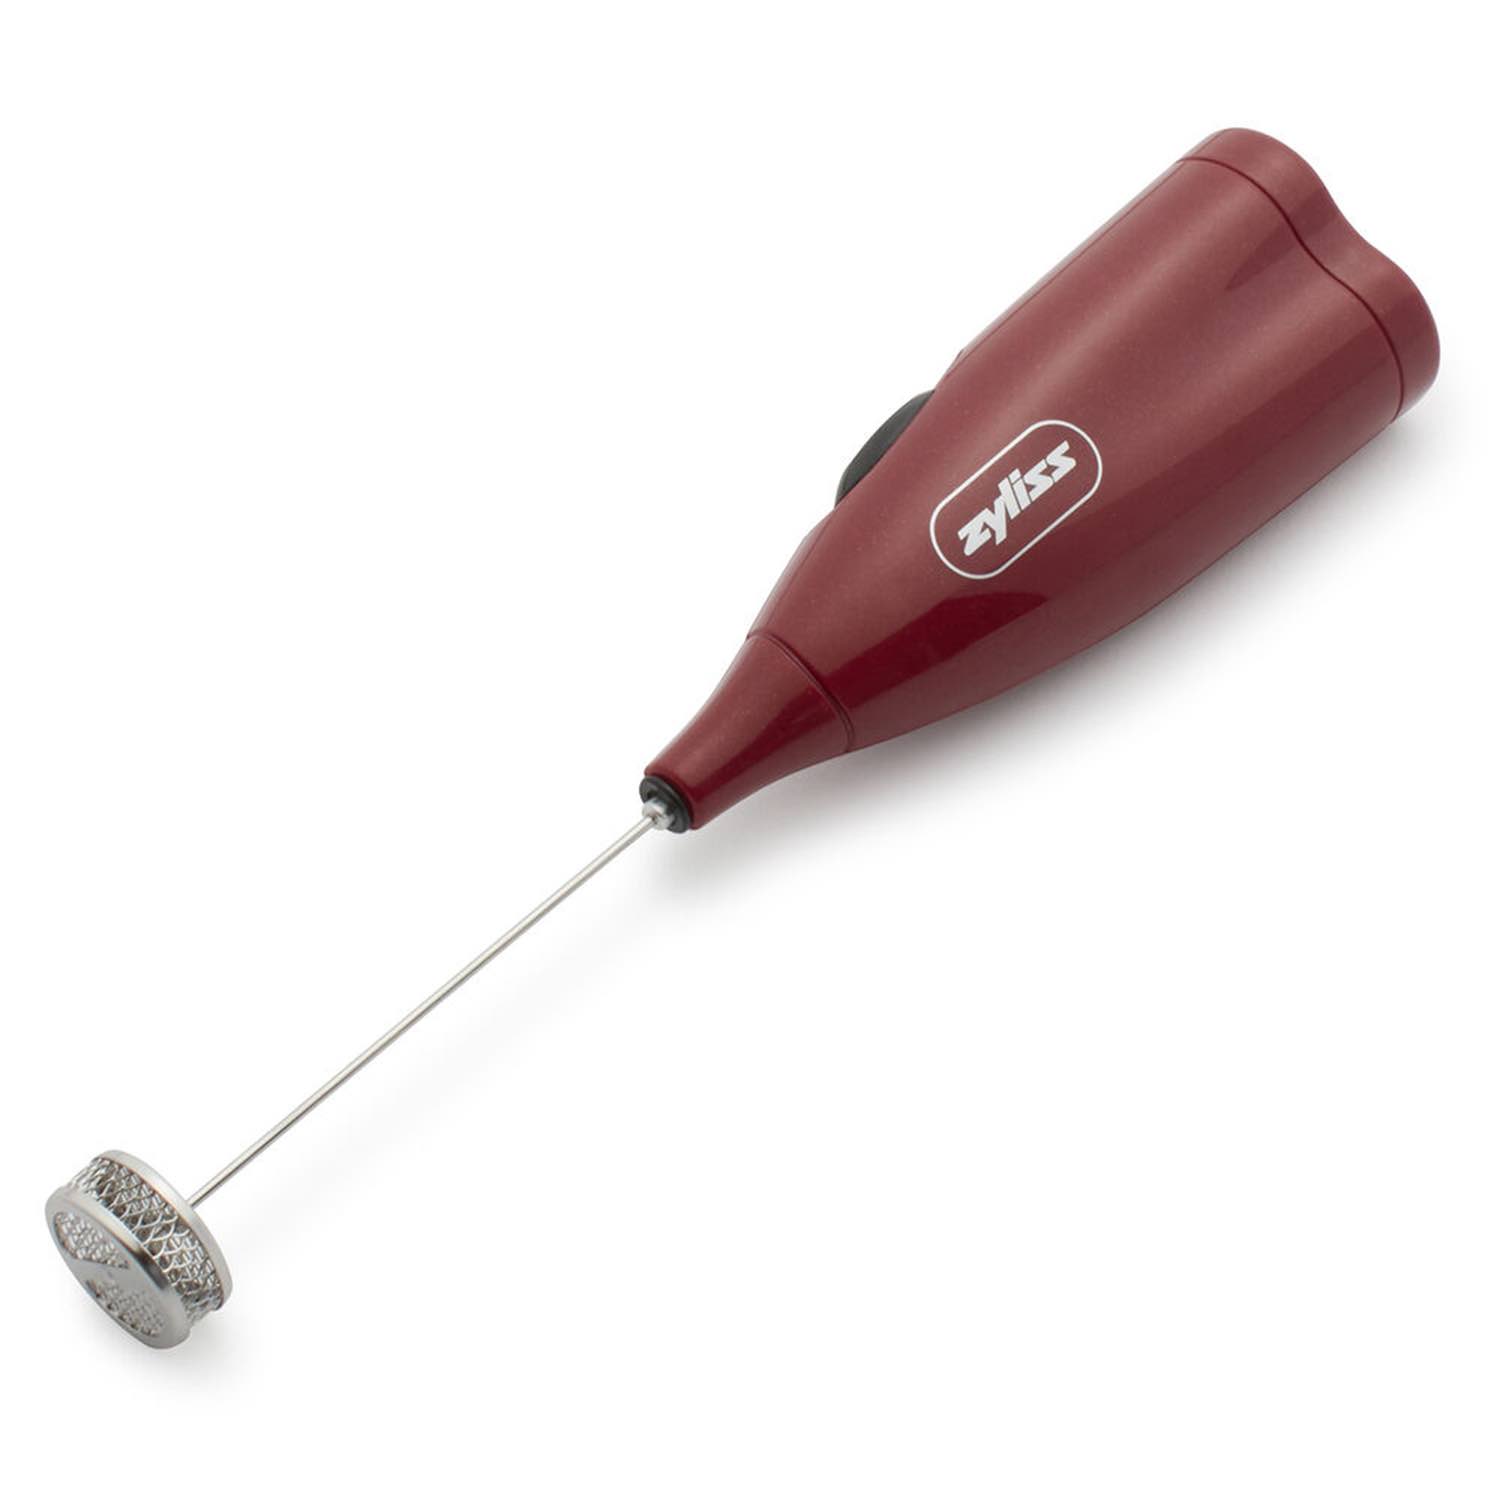 Zyliss Electric Milk Frother